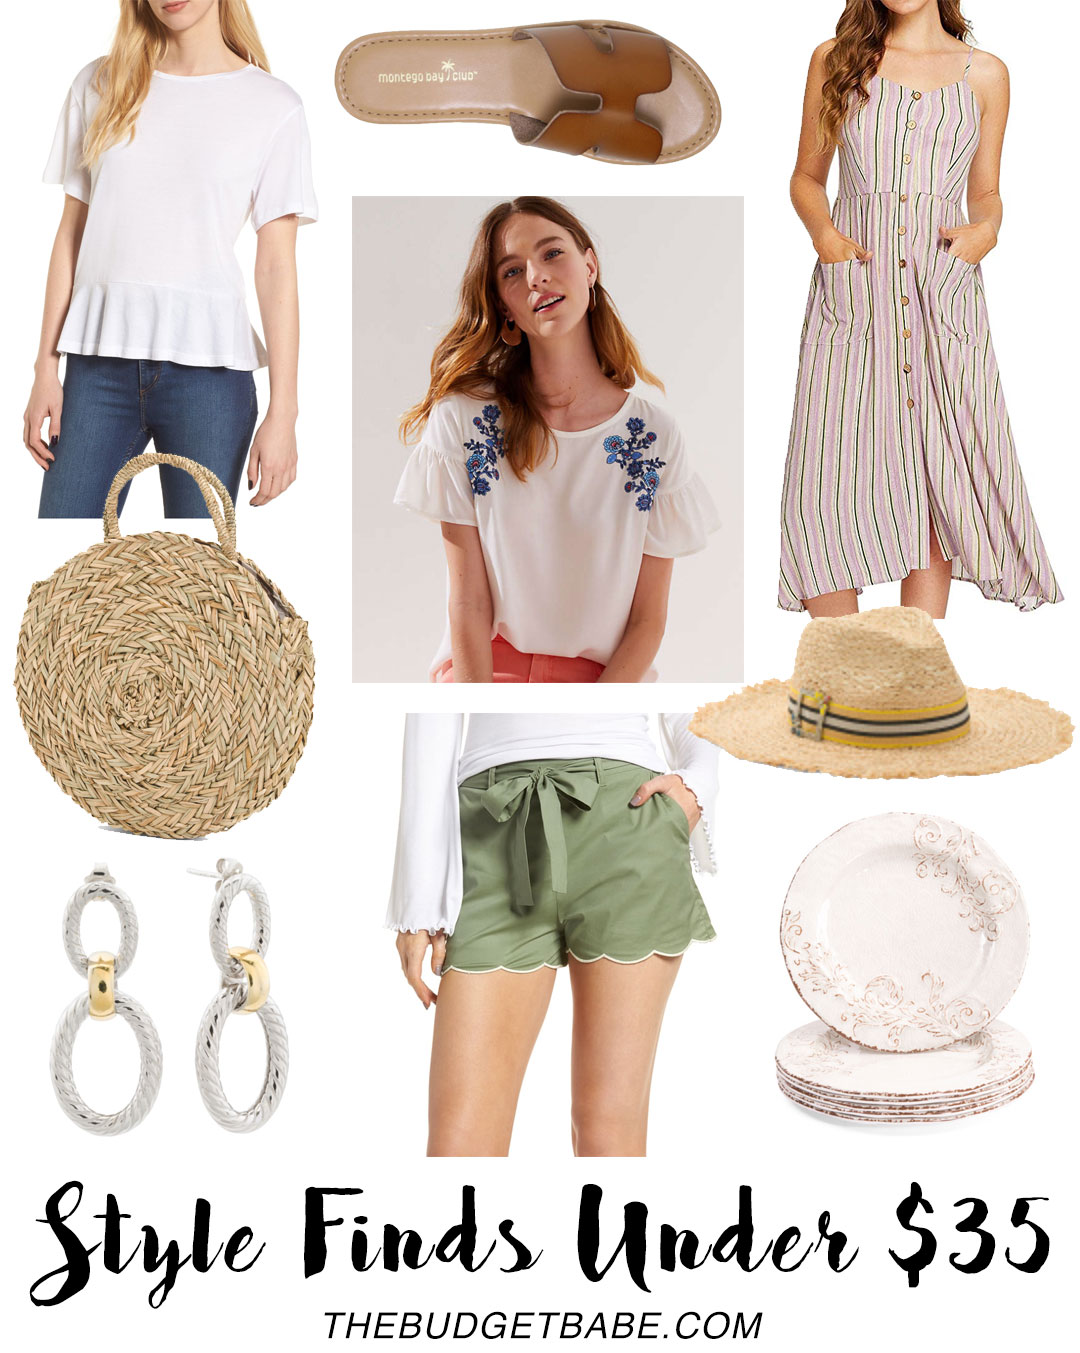 Style finds under $35 on The Budget Babe - need those cute shorts!